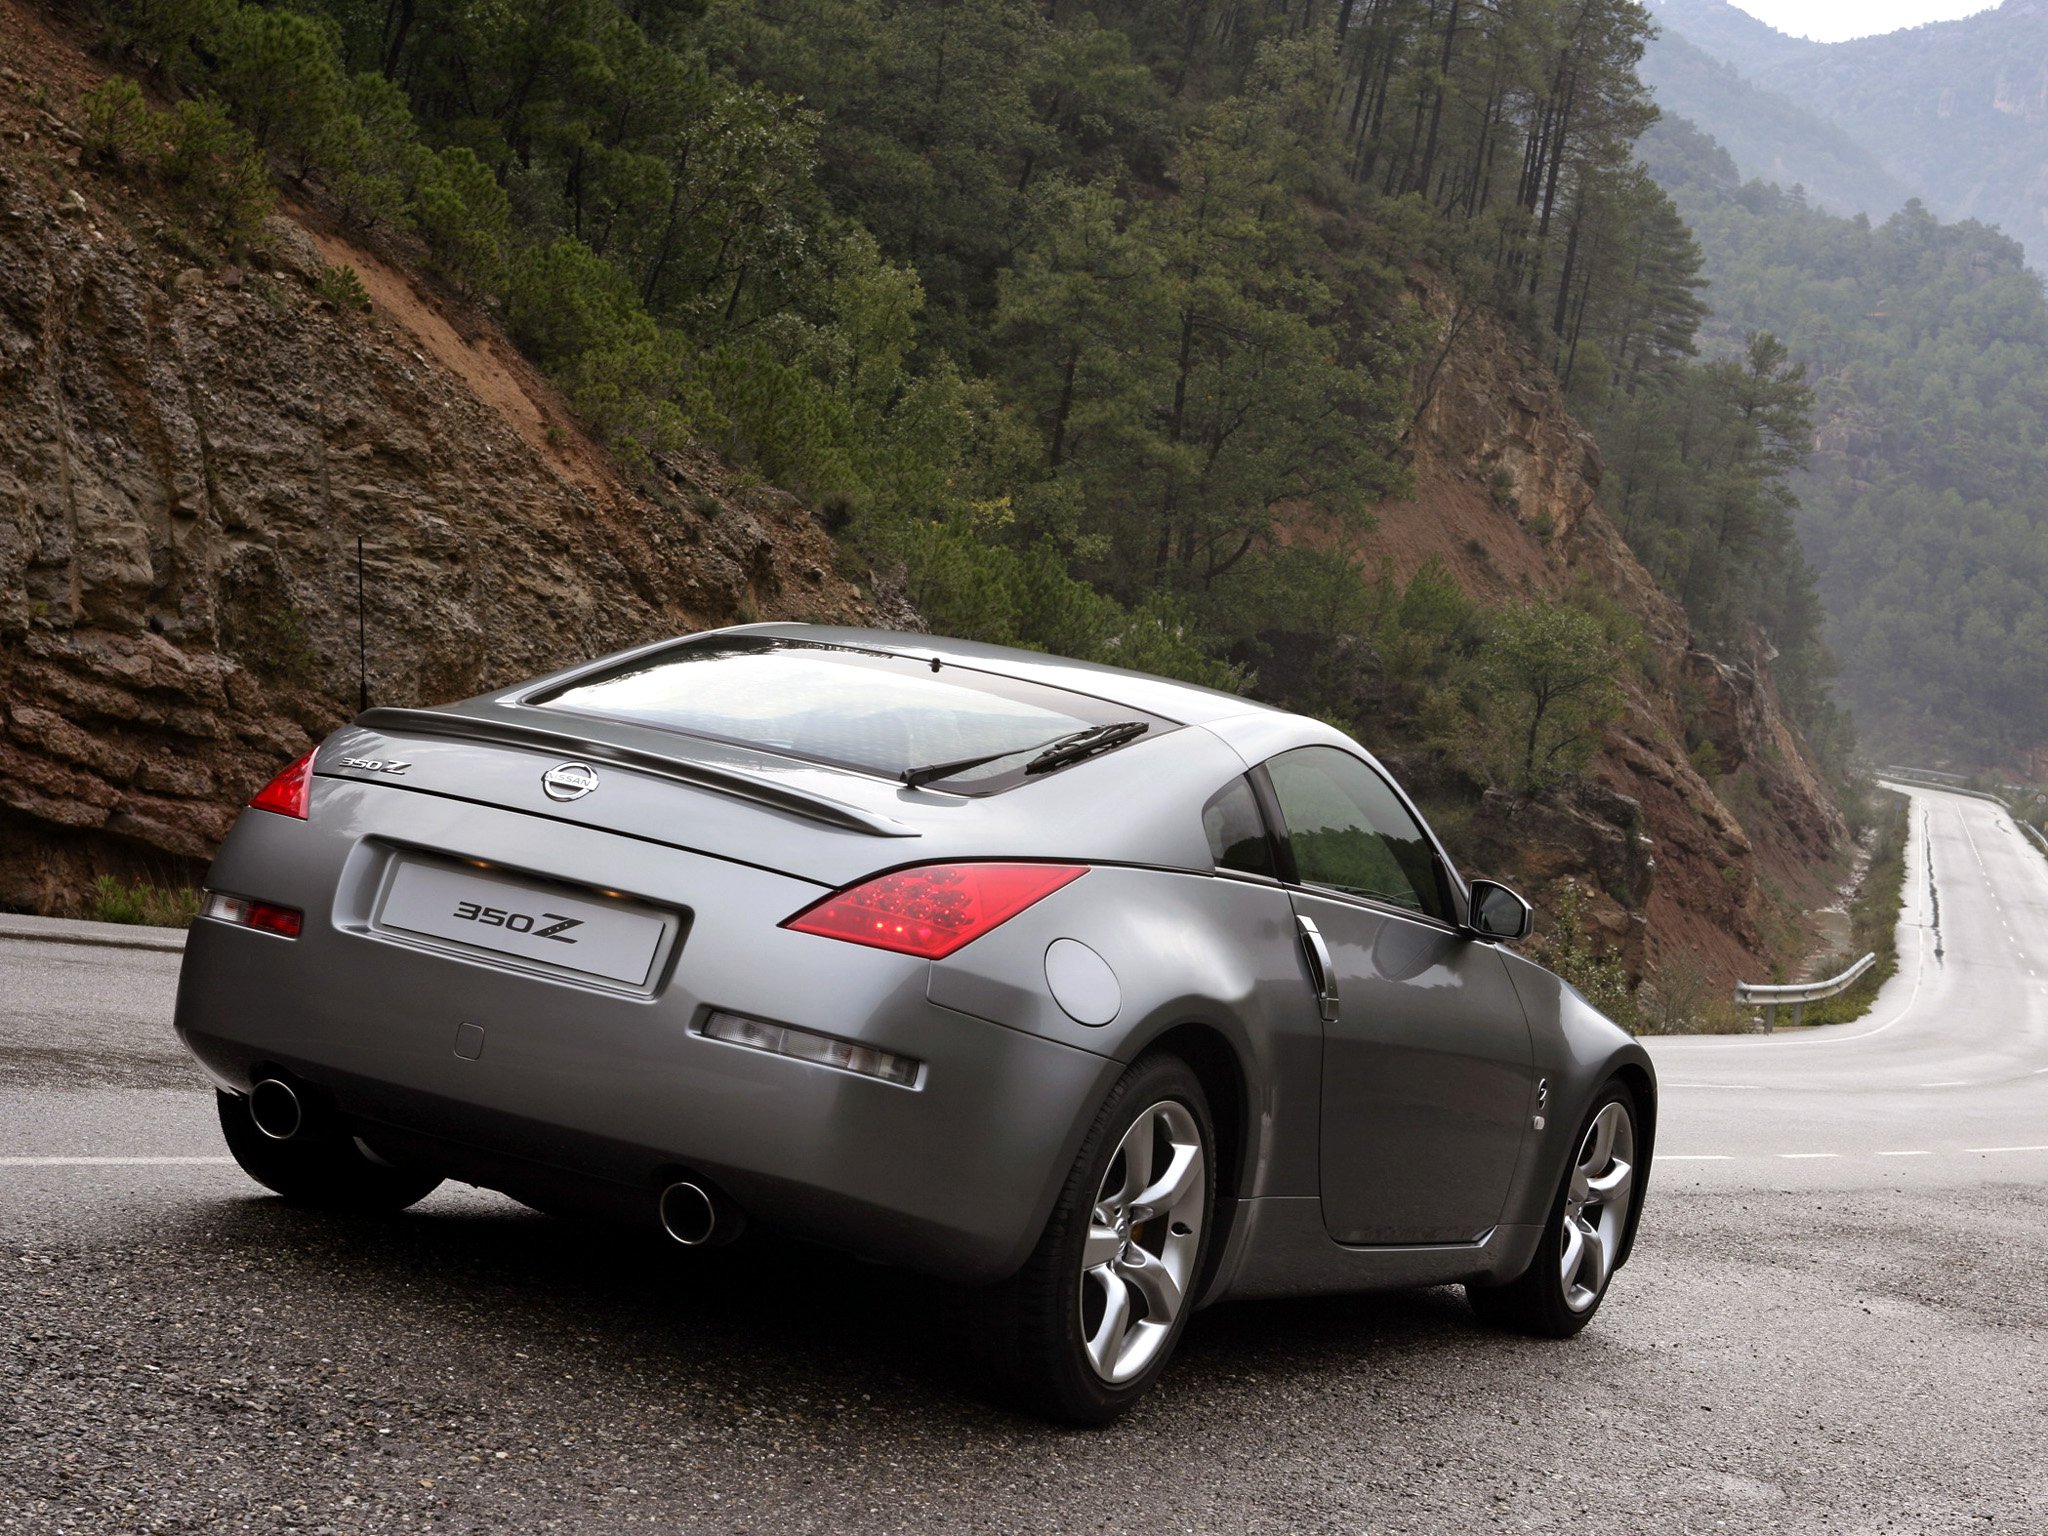 nissan, 350z, 2006, Coupe, Cars Wallpaper